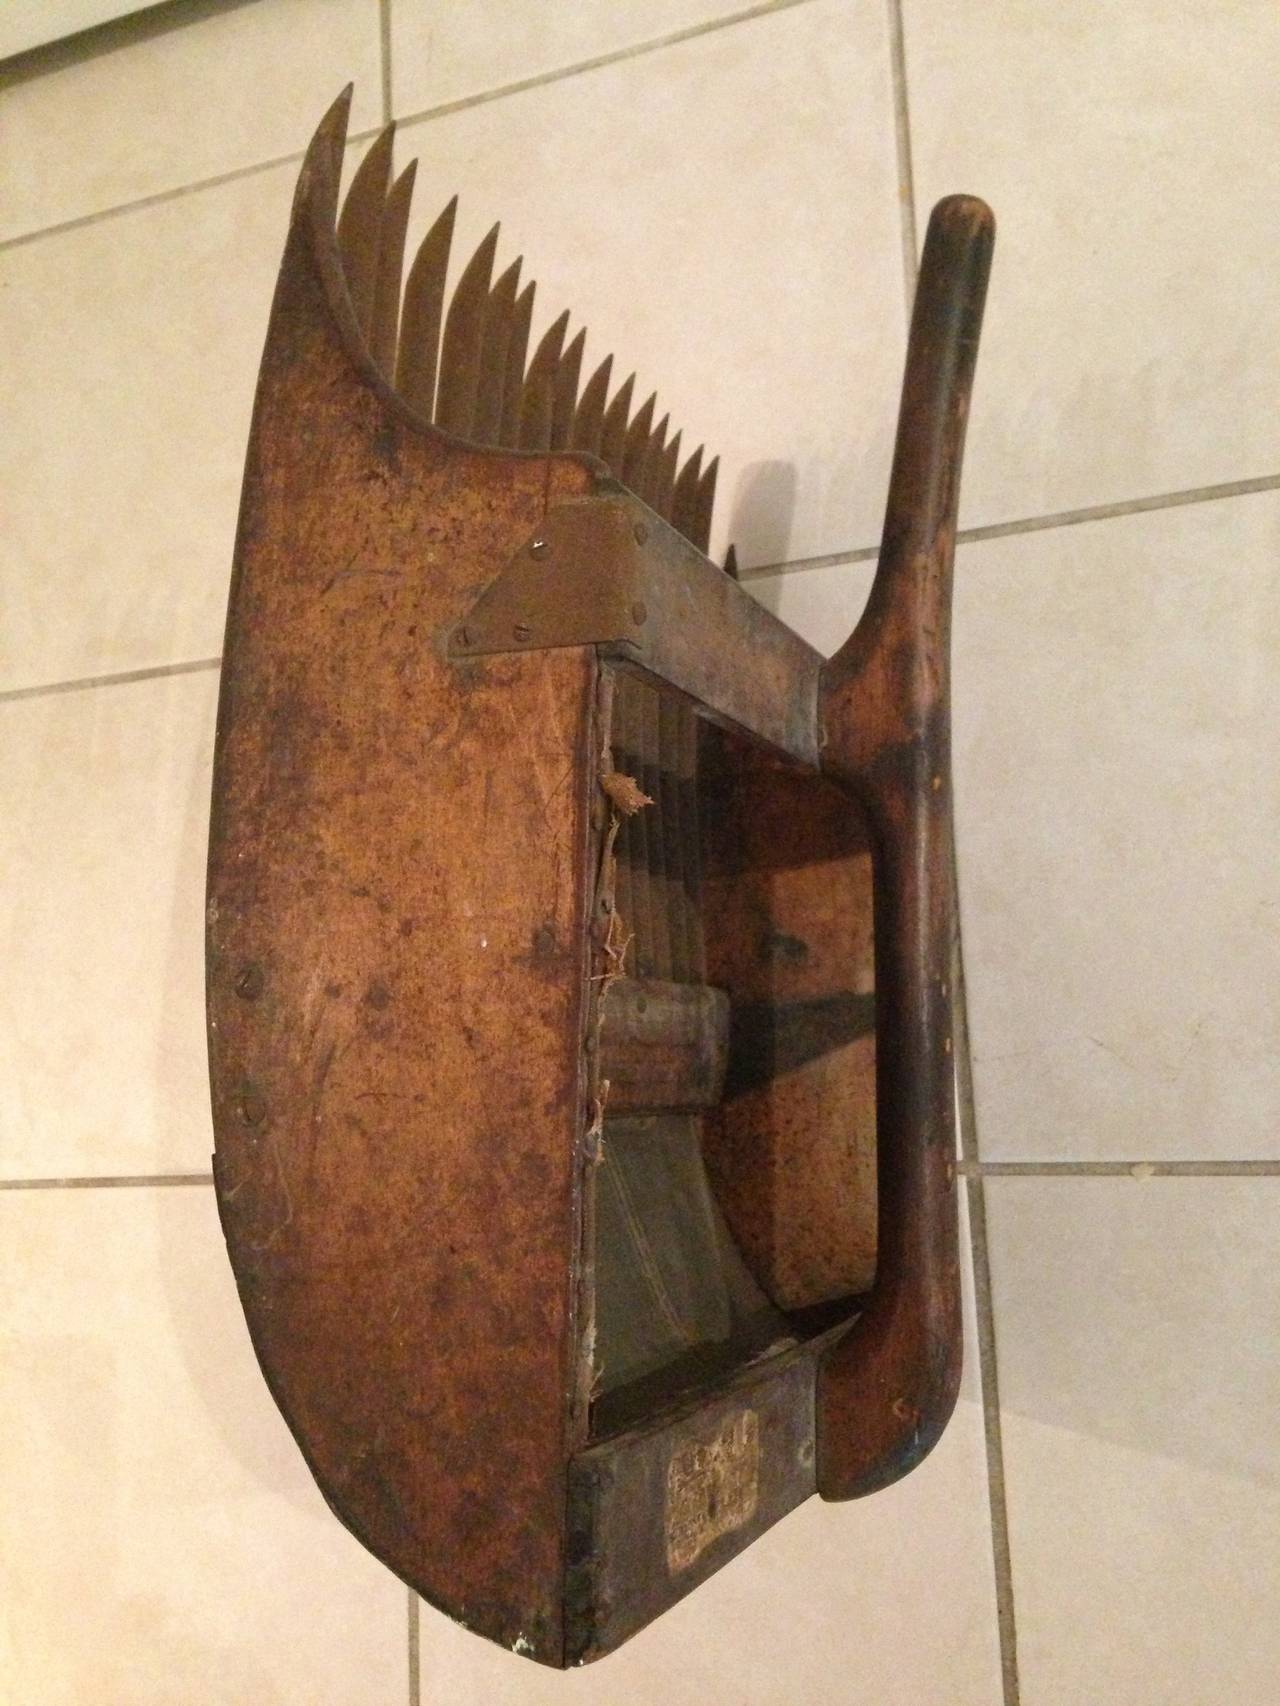 American Cranberry Harvesting Scoop from Maine, early 1900s